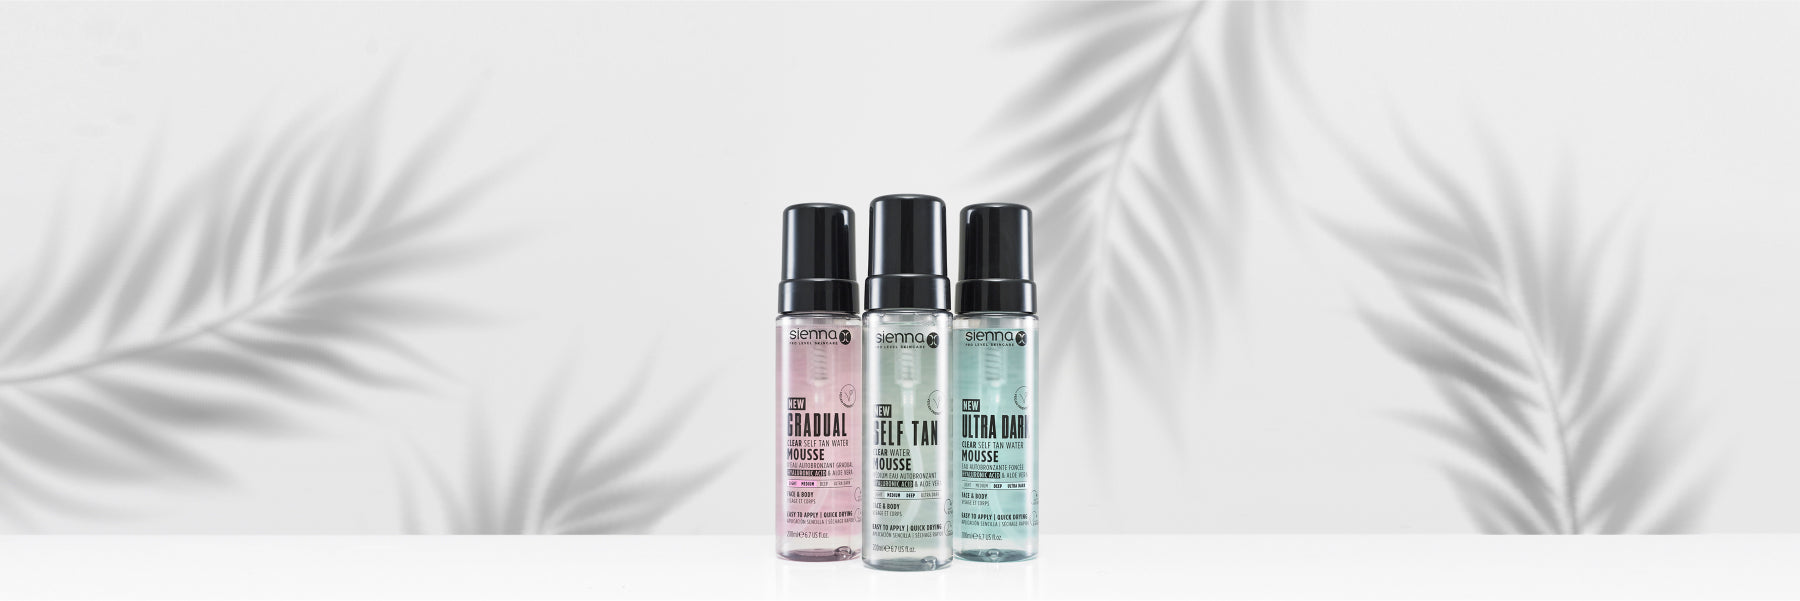 Introducing the Clear Self Tan Water Mousse range by Sienna X